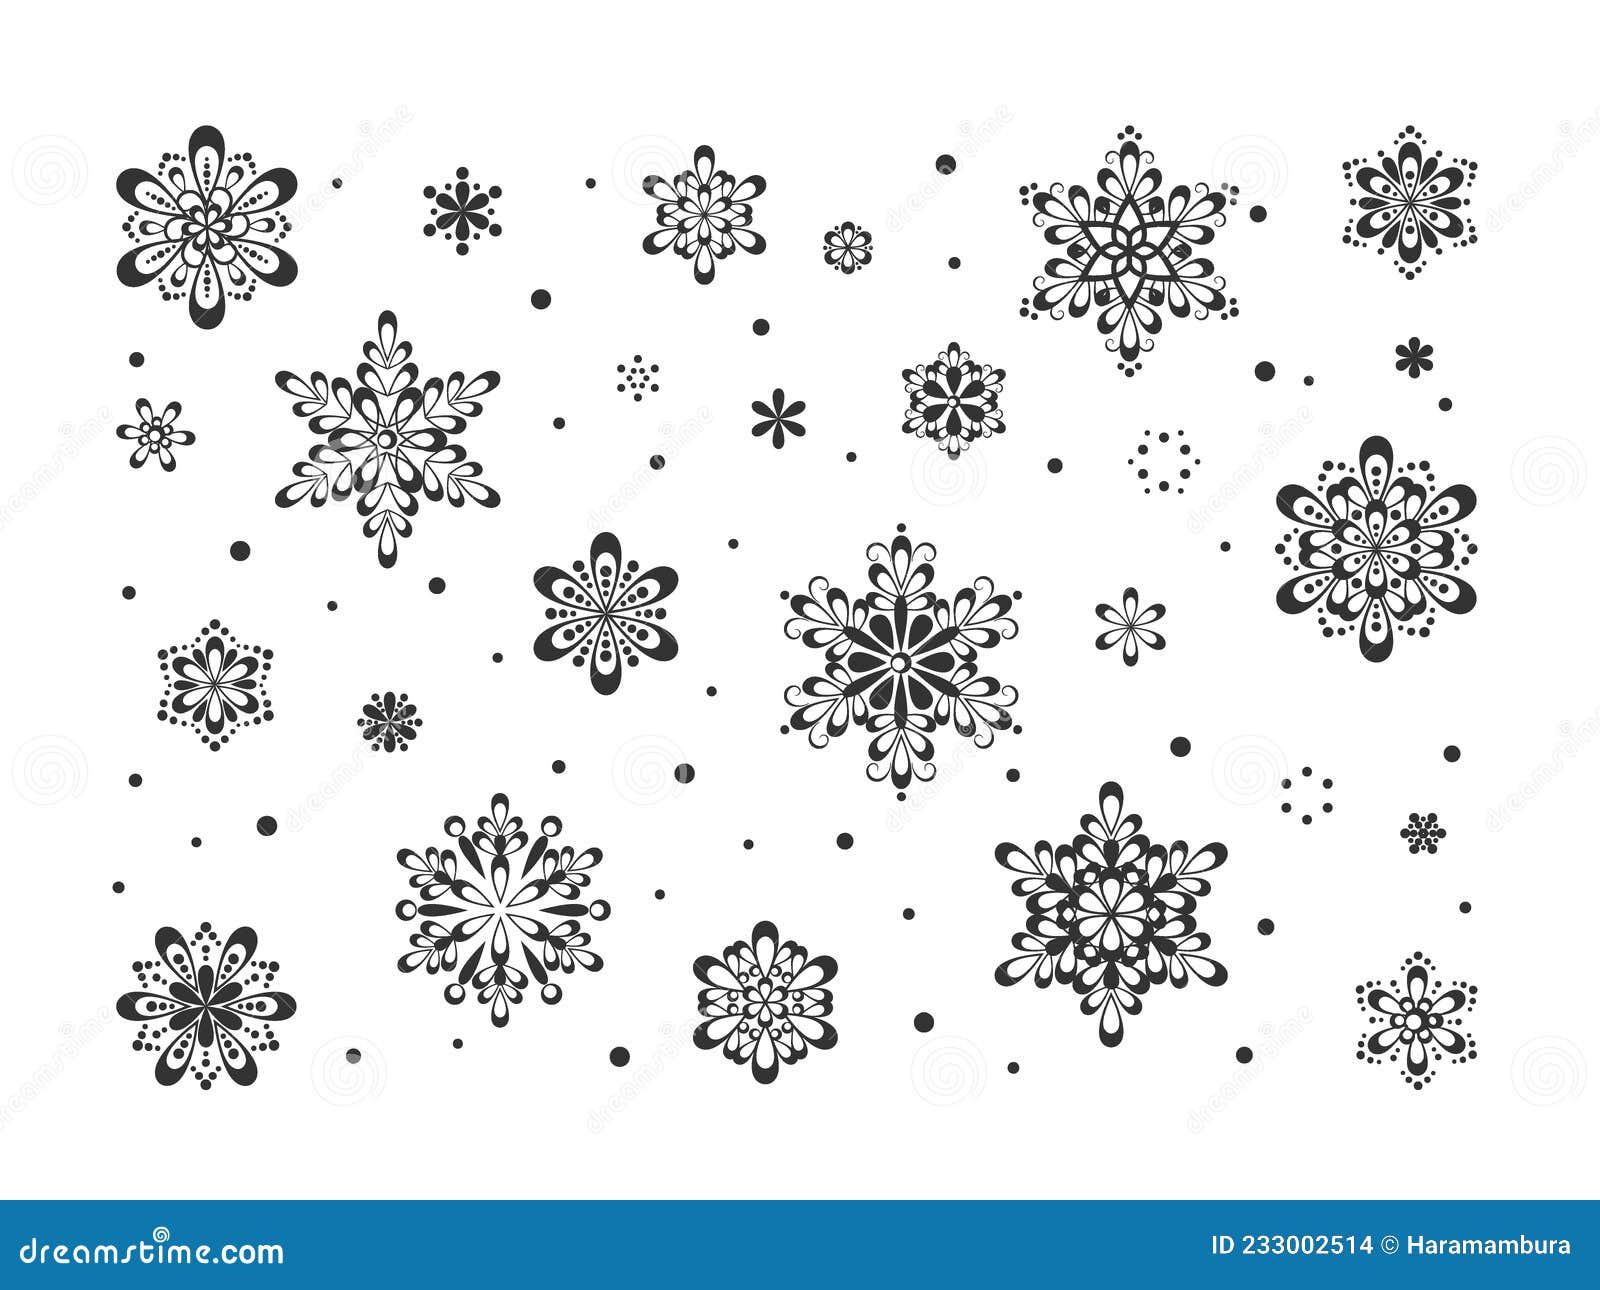 A Set of Stylized Snowflakes. Snowy, Winter Christmas Soft Motives ...